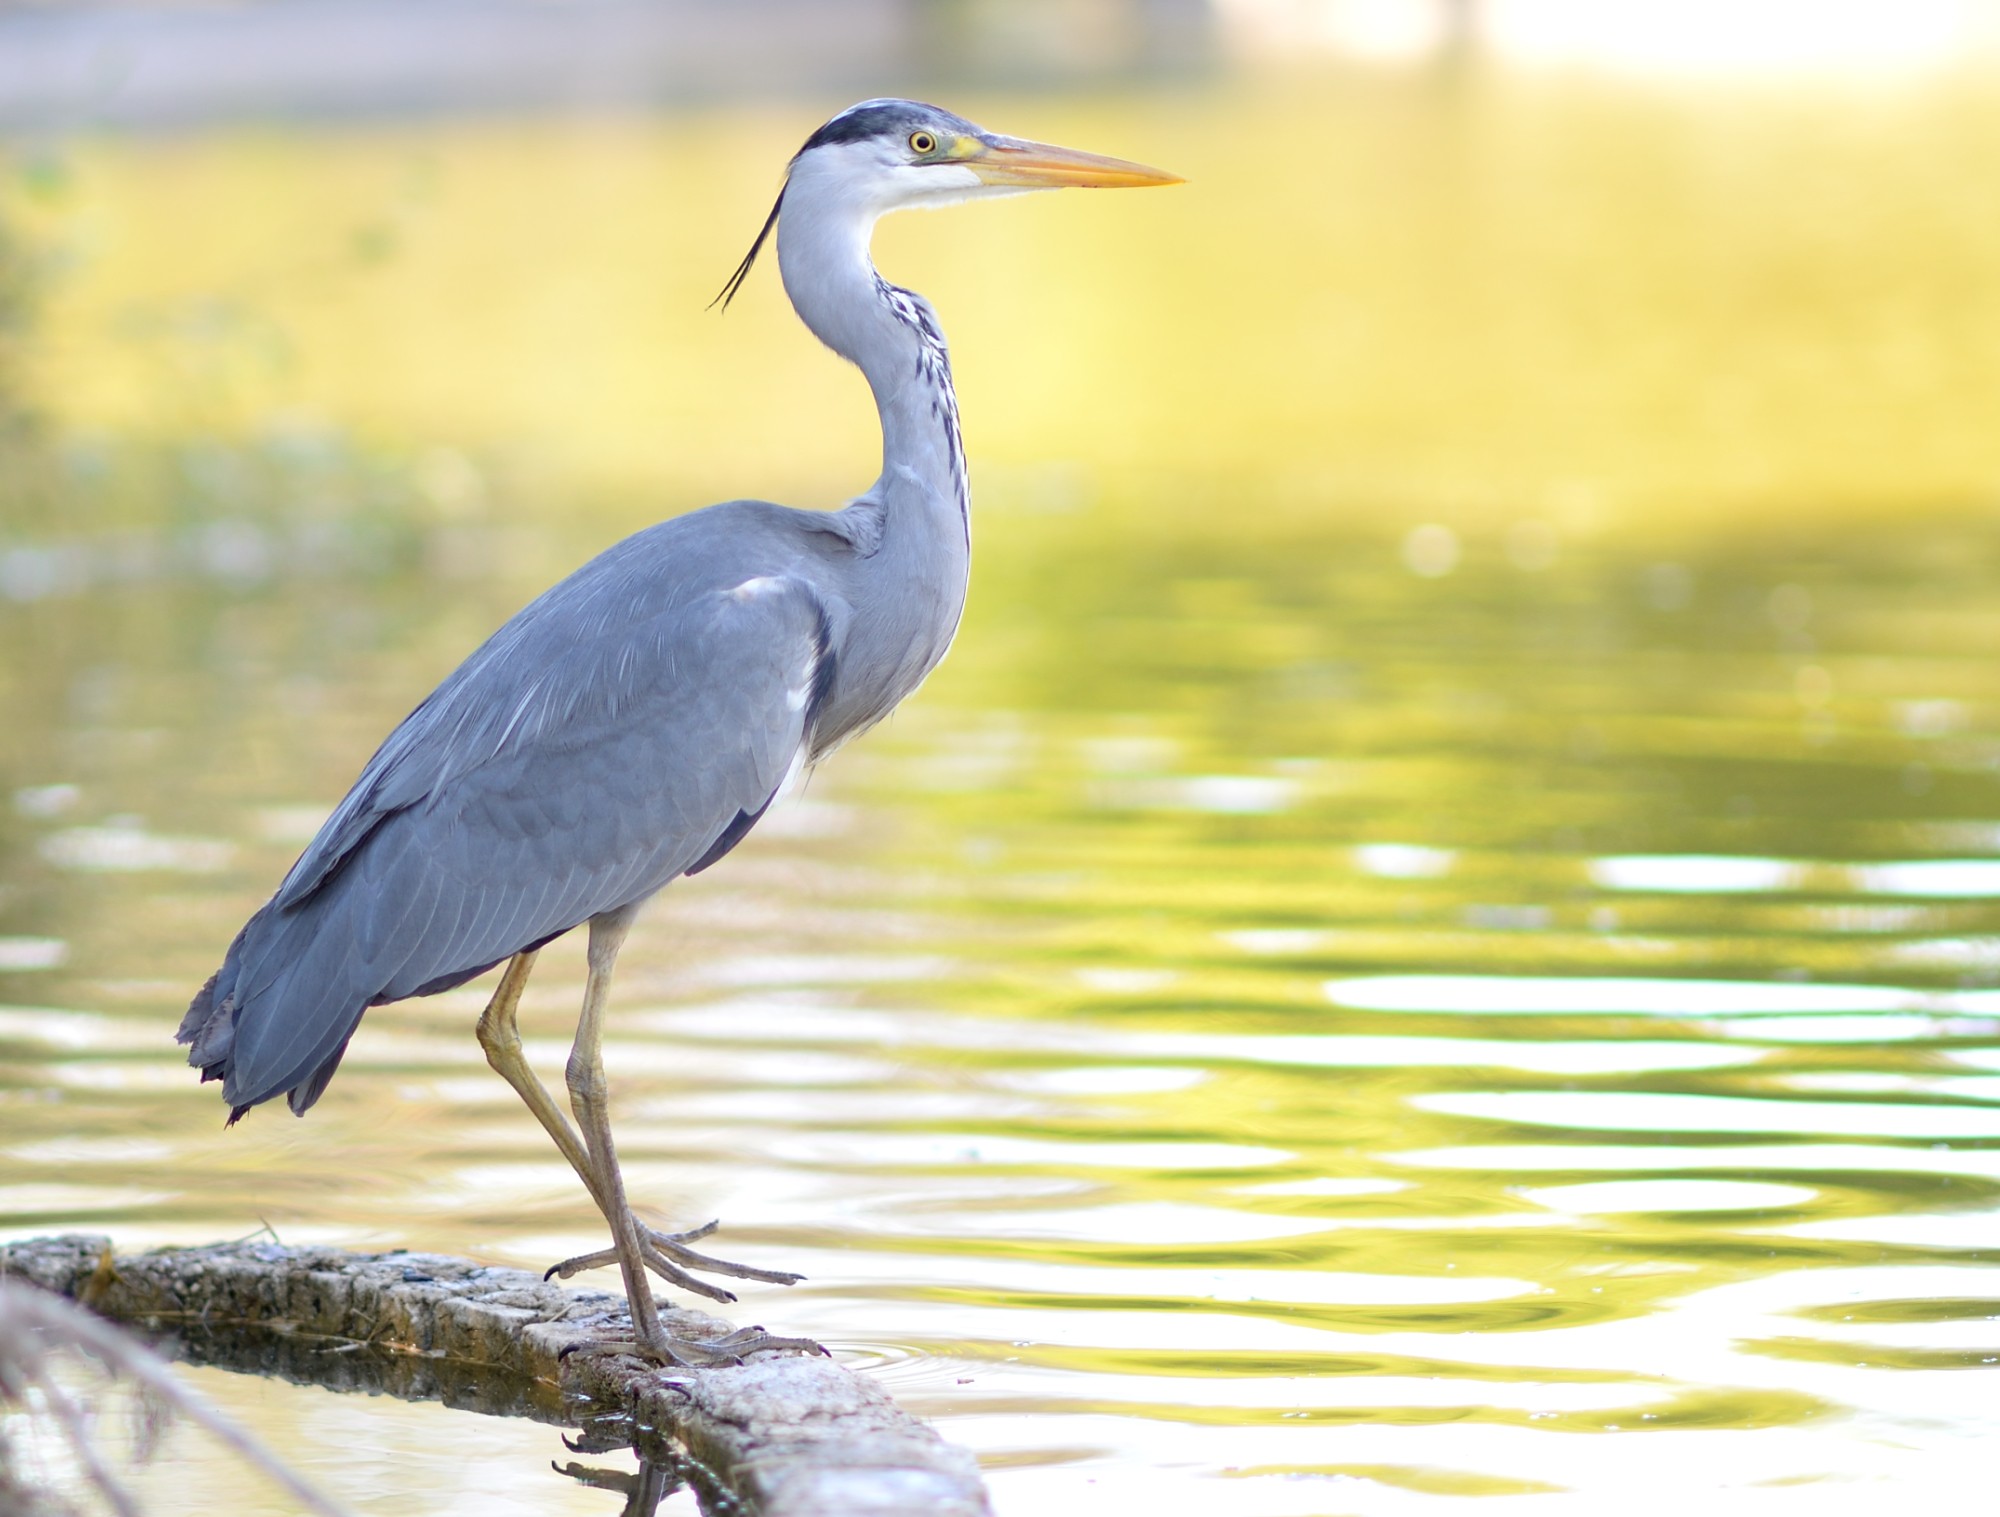 The NHBS Guide to UK Heron, Egret and Bittern Identification